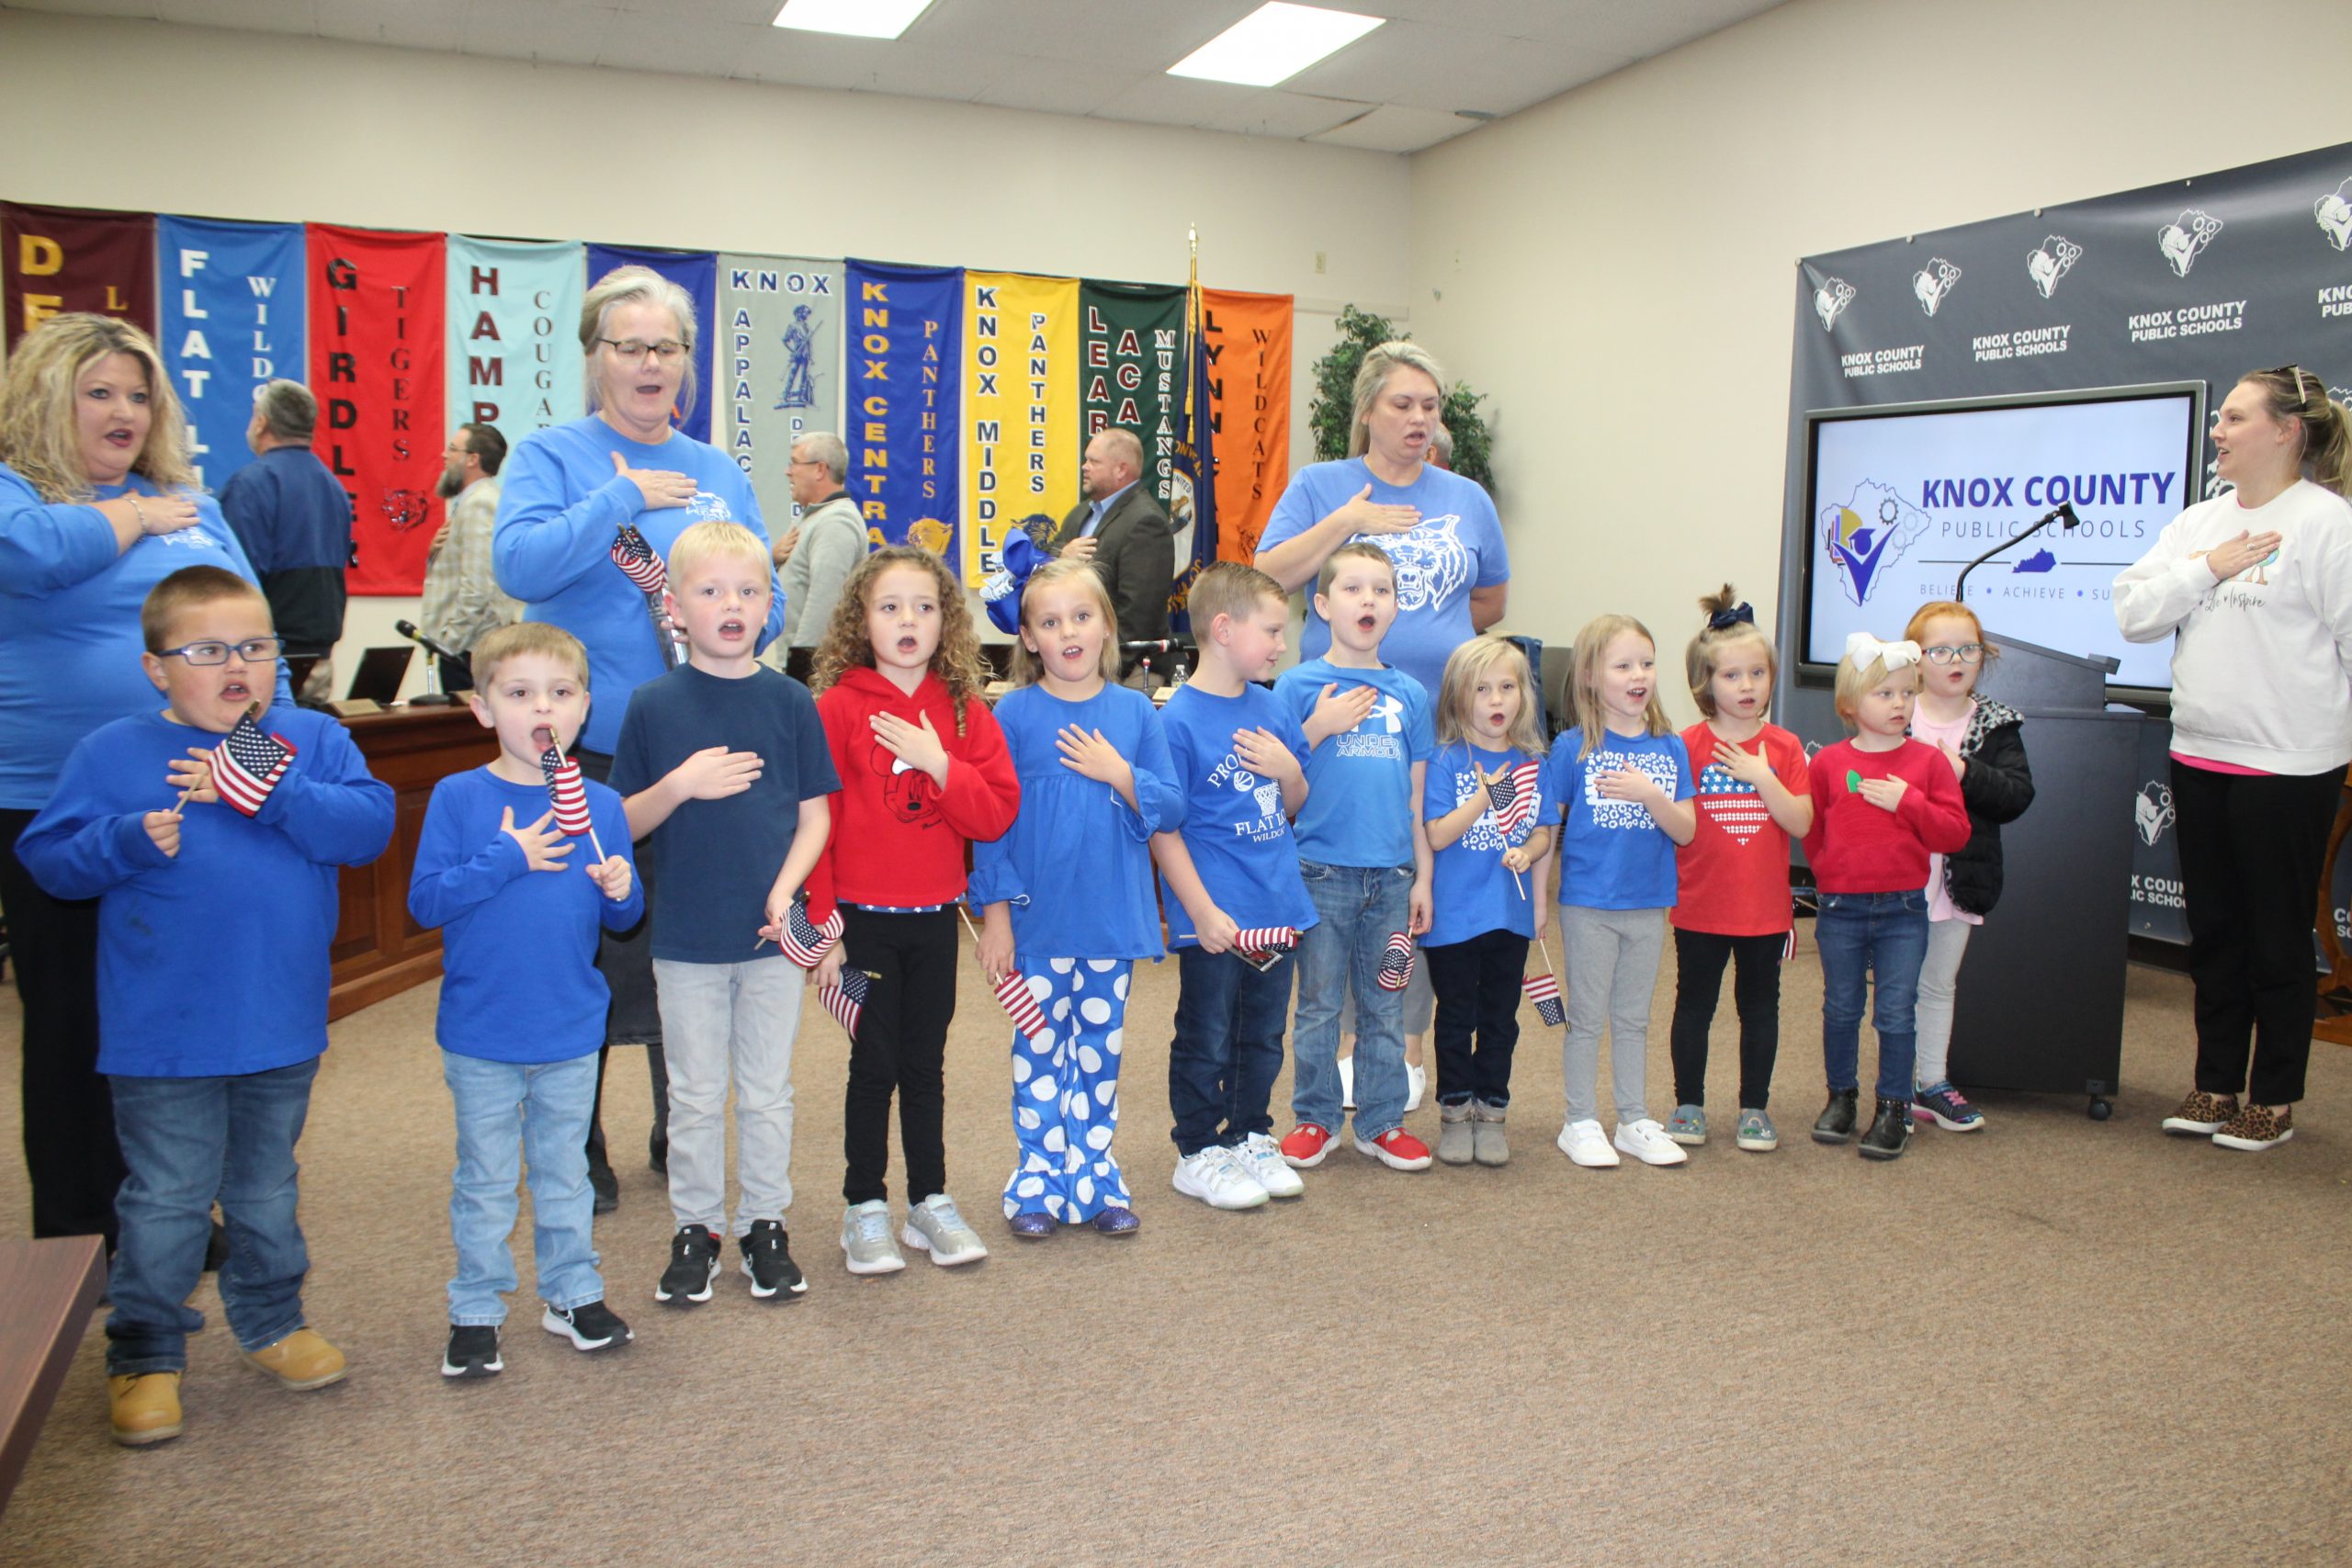 Flat Lick kindergarten students lined up to recite the Pledge in front of the Knox County Board members and audience.